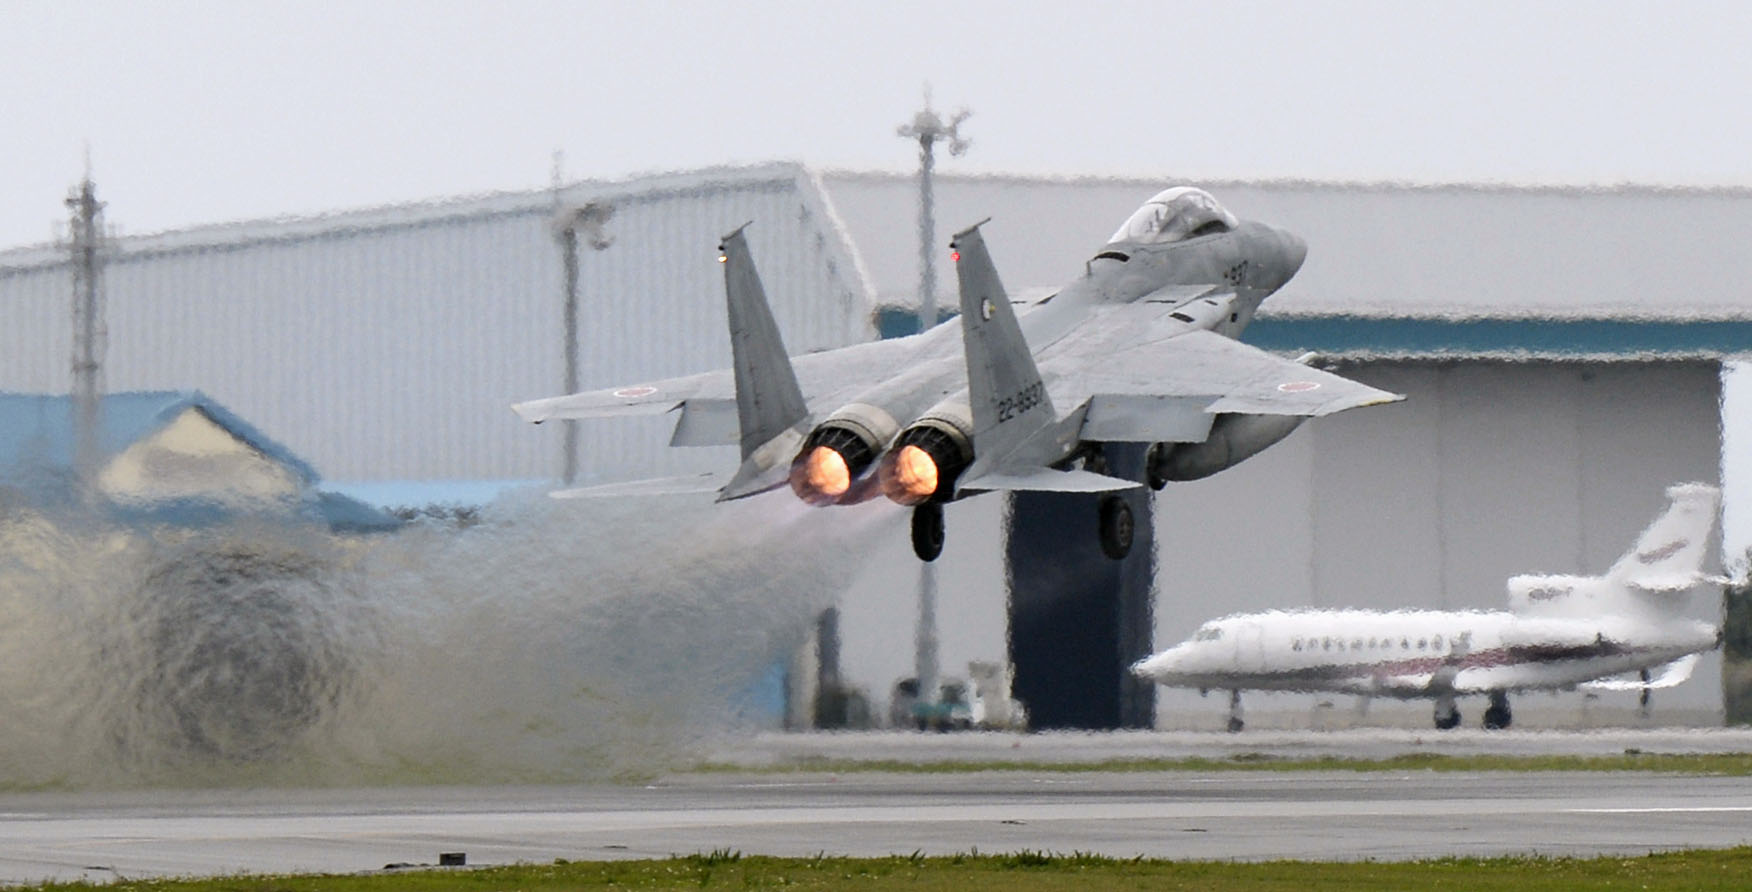 An F-15 fighter is scrambled from the Air Self-Defense Force's Naha base in Okinawa in April 2015. | KYODO